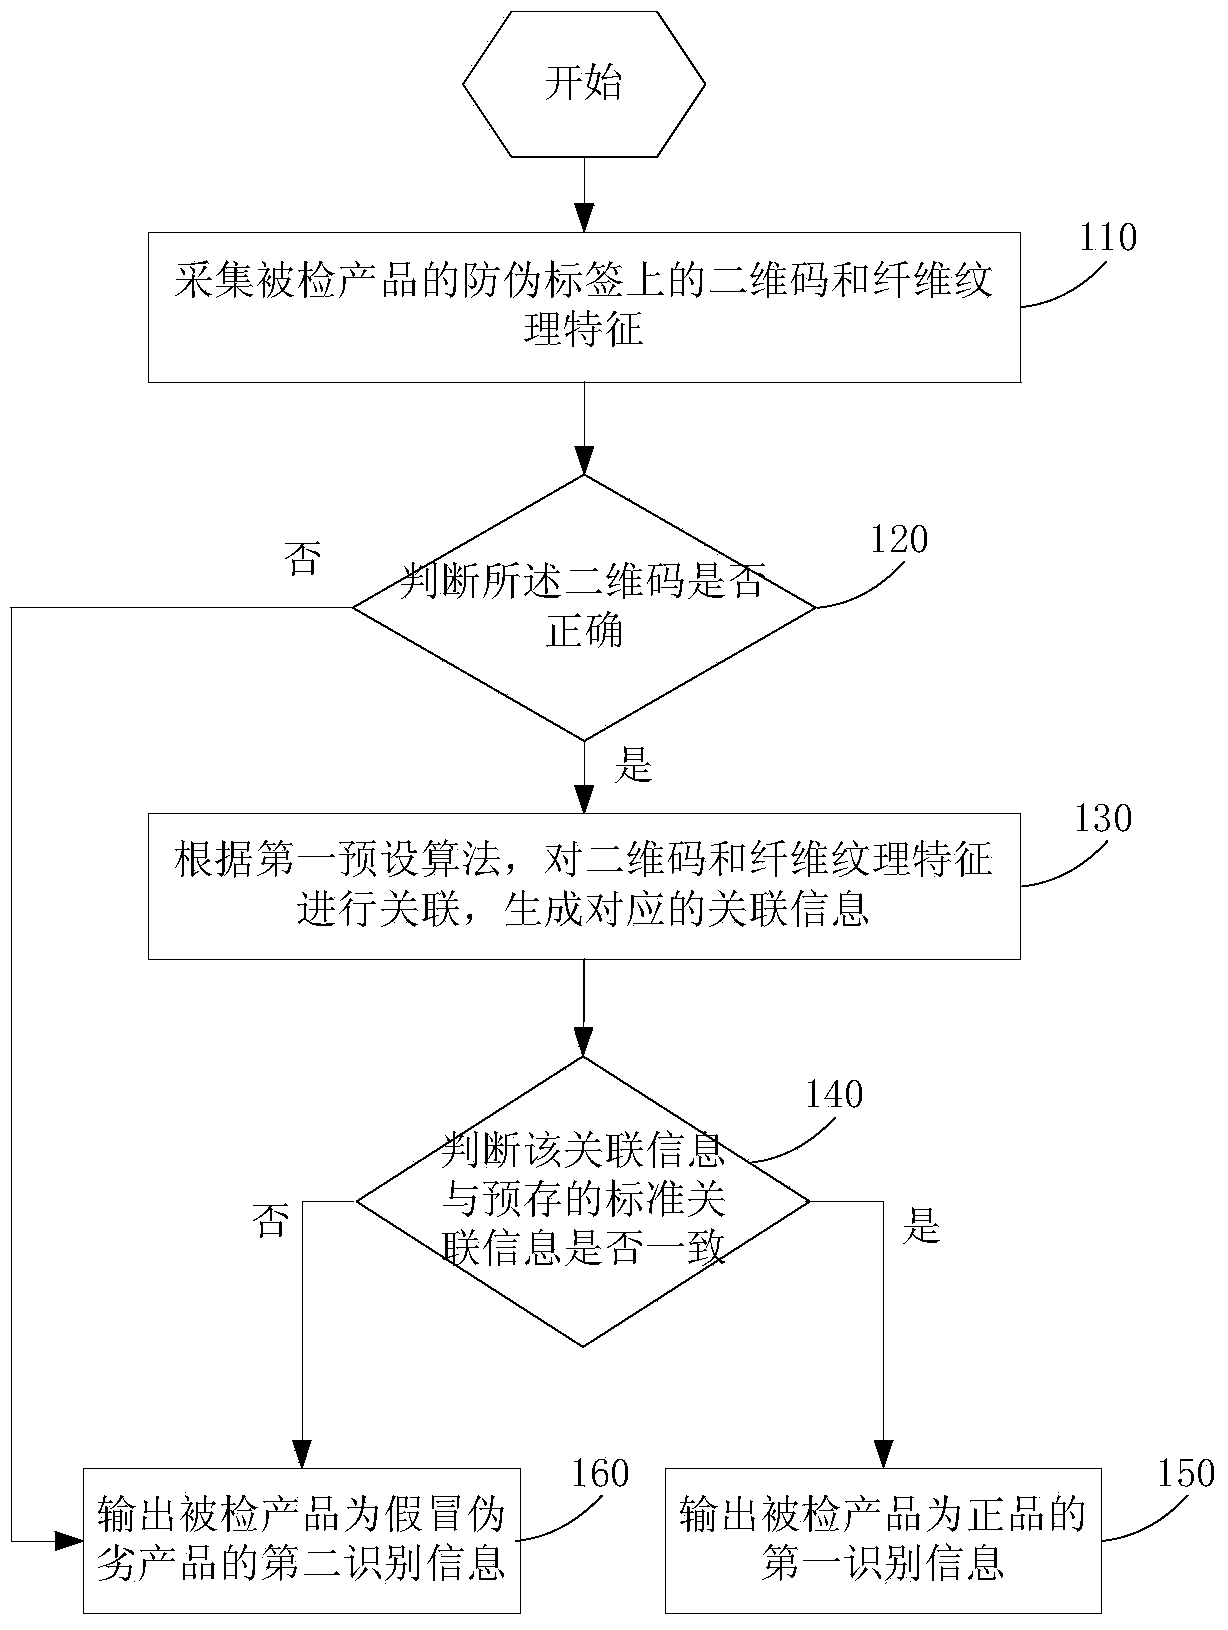 Anti-fake detection method, device and system